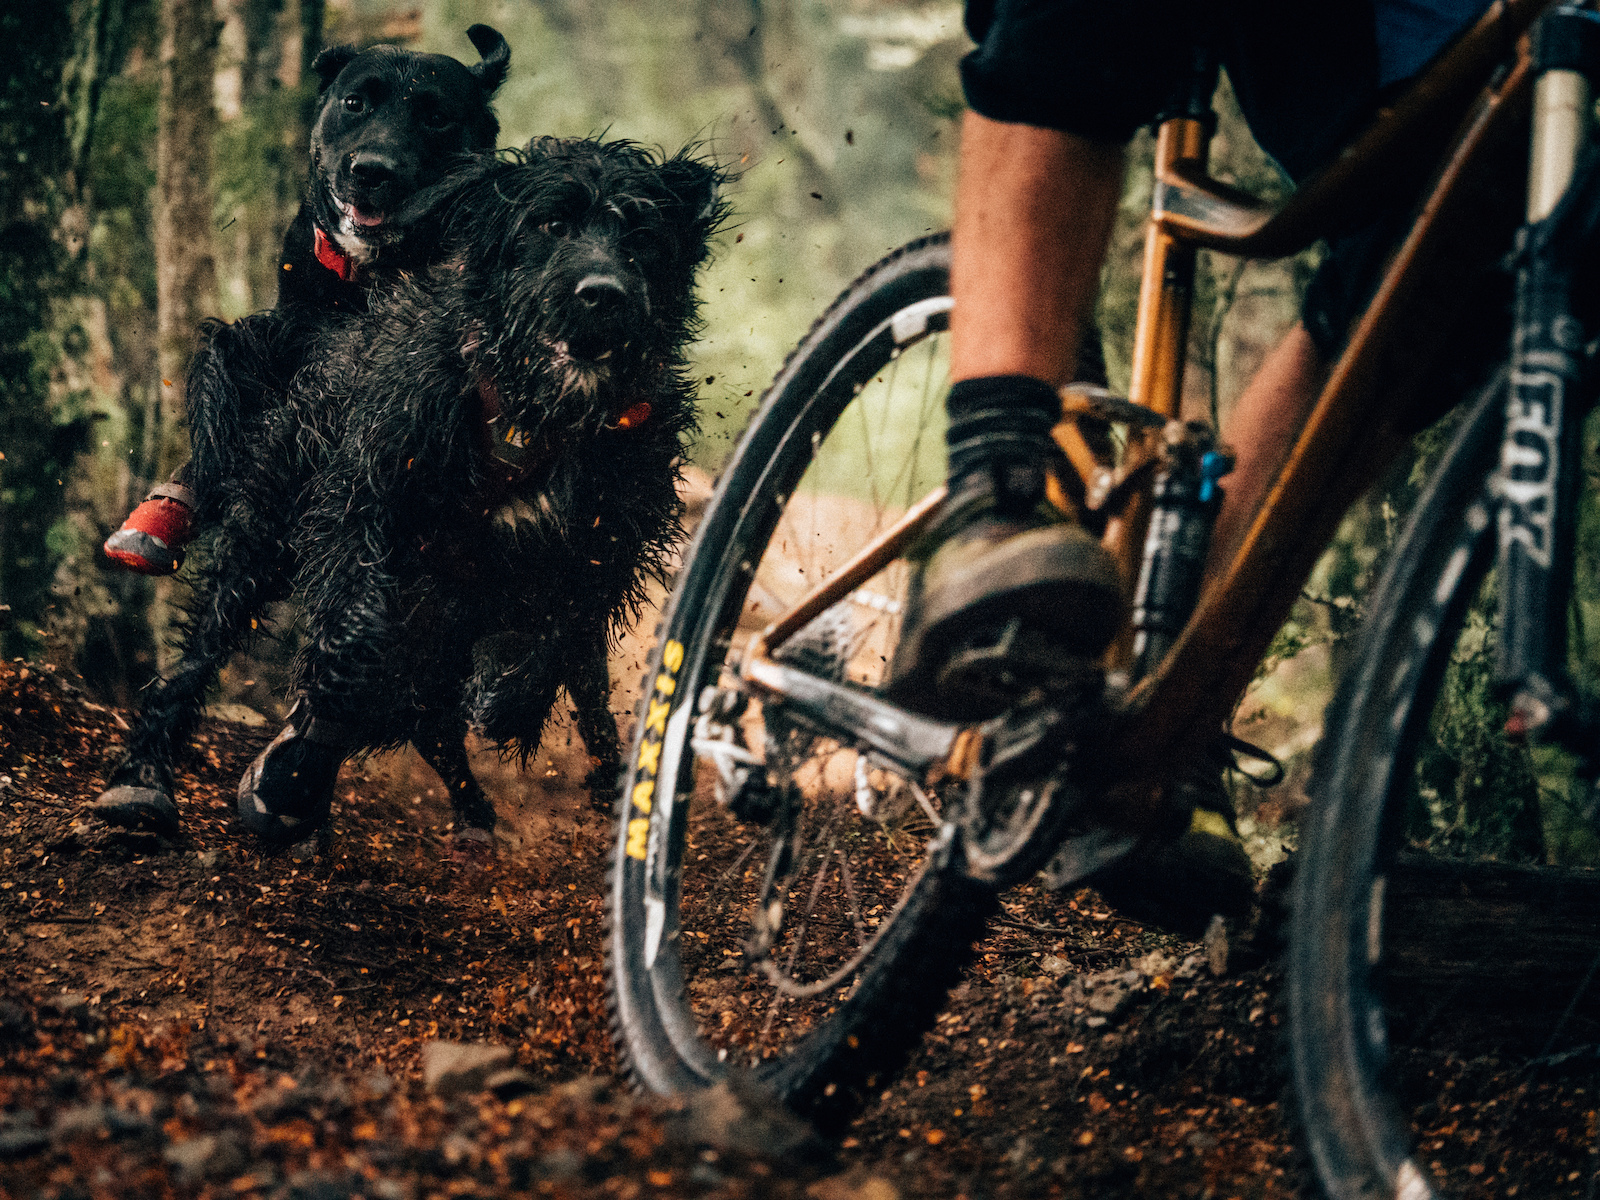 Frank's face sums up the stoke in this photo! Checkout the latest NZ Mountain Biker for some great tips on riding with man's best friend.